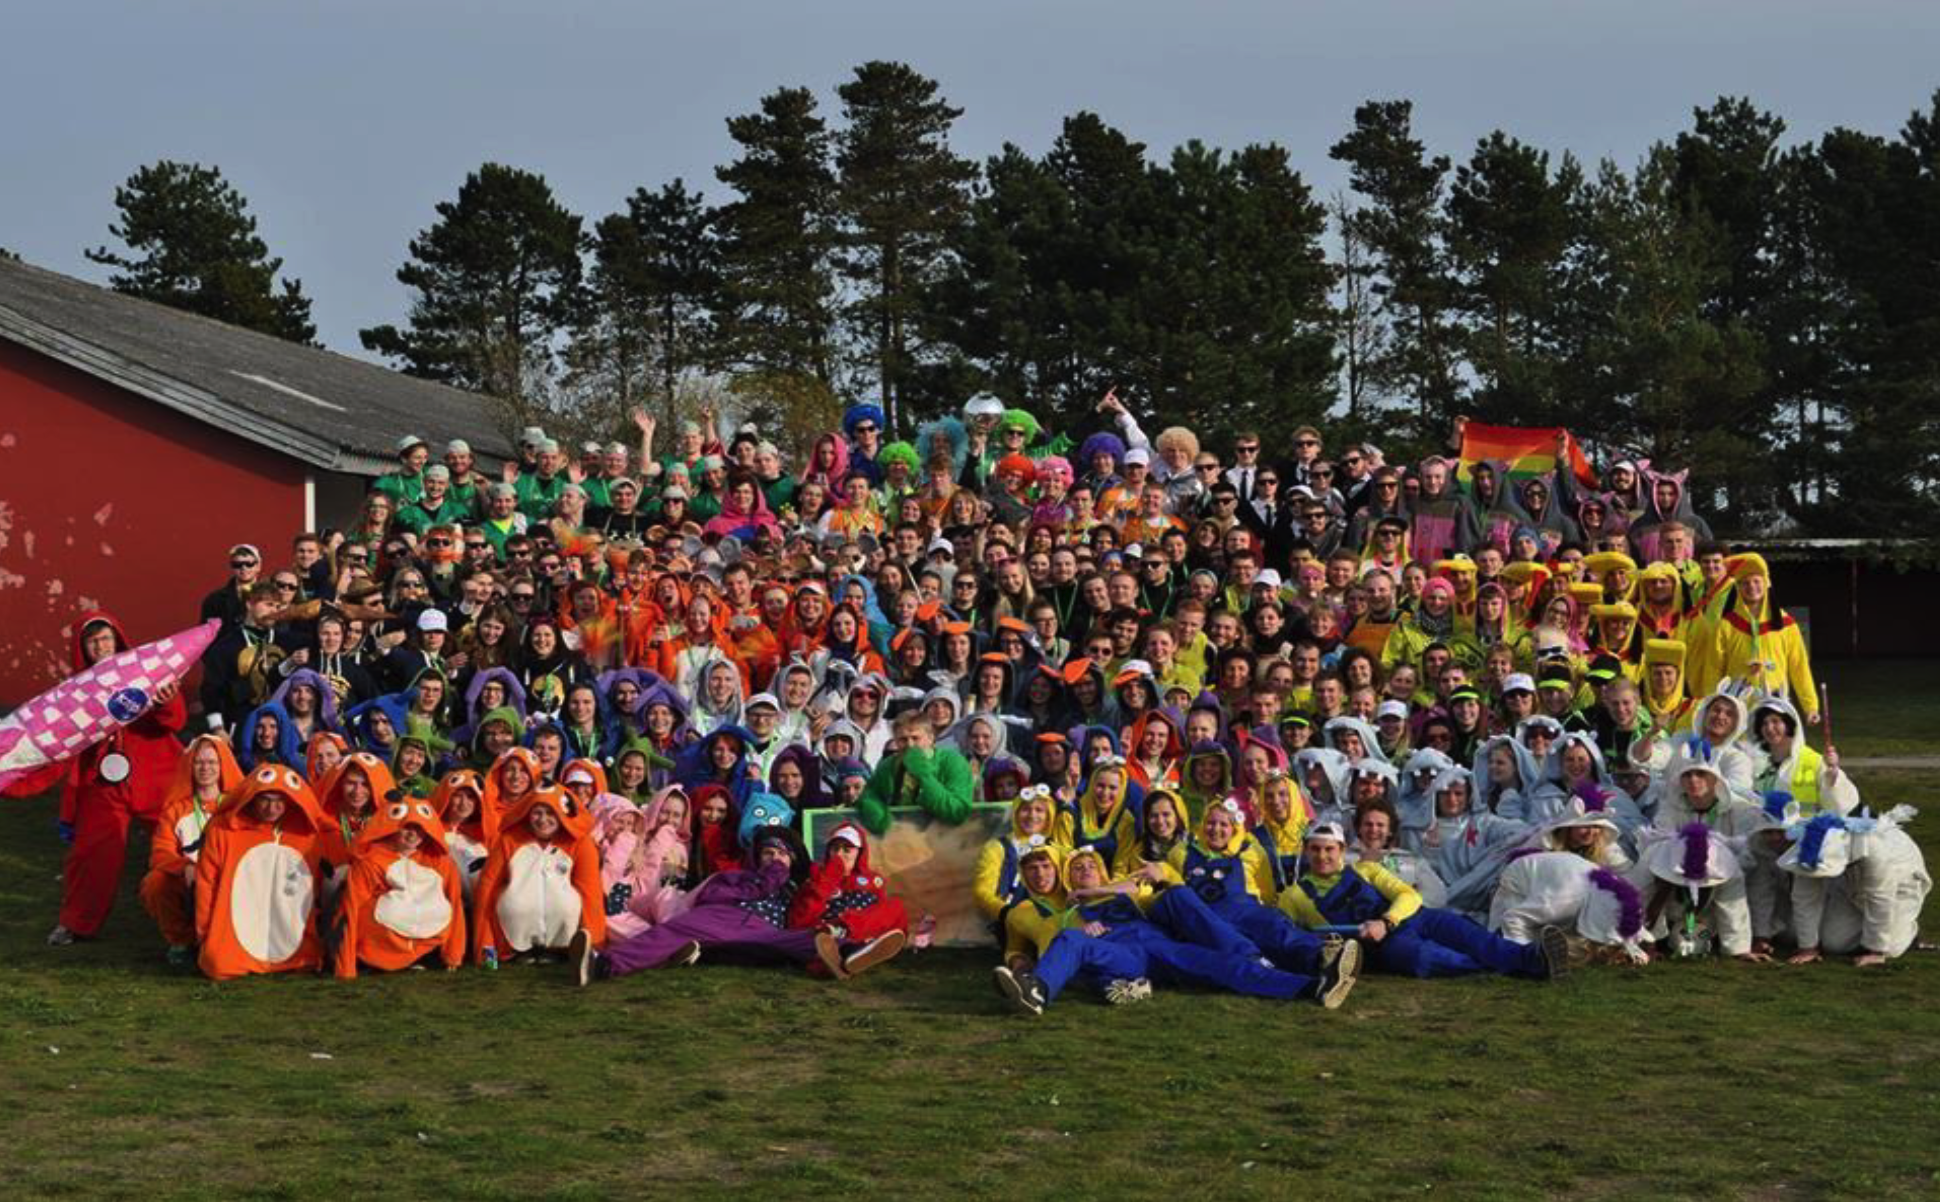 Total group of 300 tutors for managing 6 months of rushing. Different costumes distinguish different interdisciplinary taskforces (2014, with permission from Polyteknisk Forening).